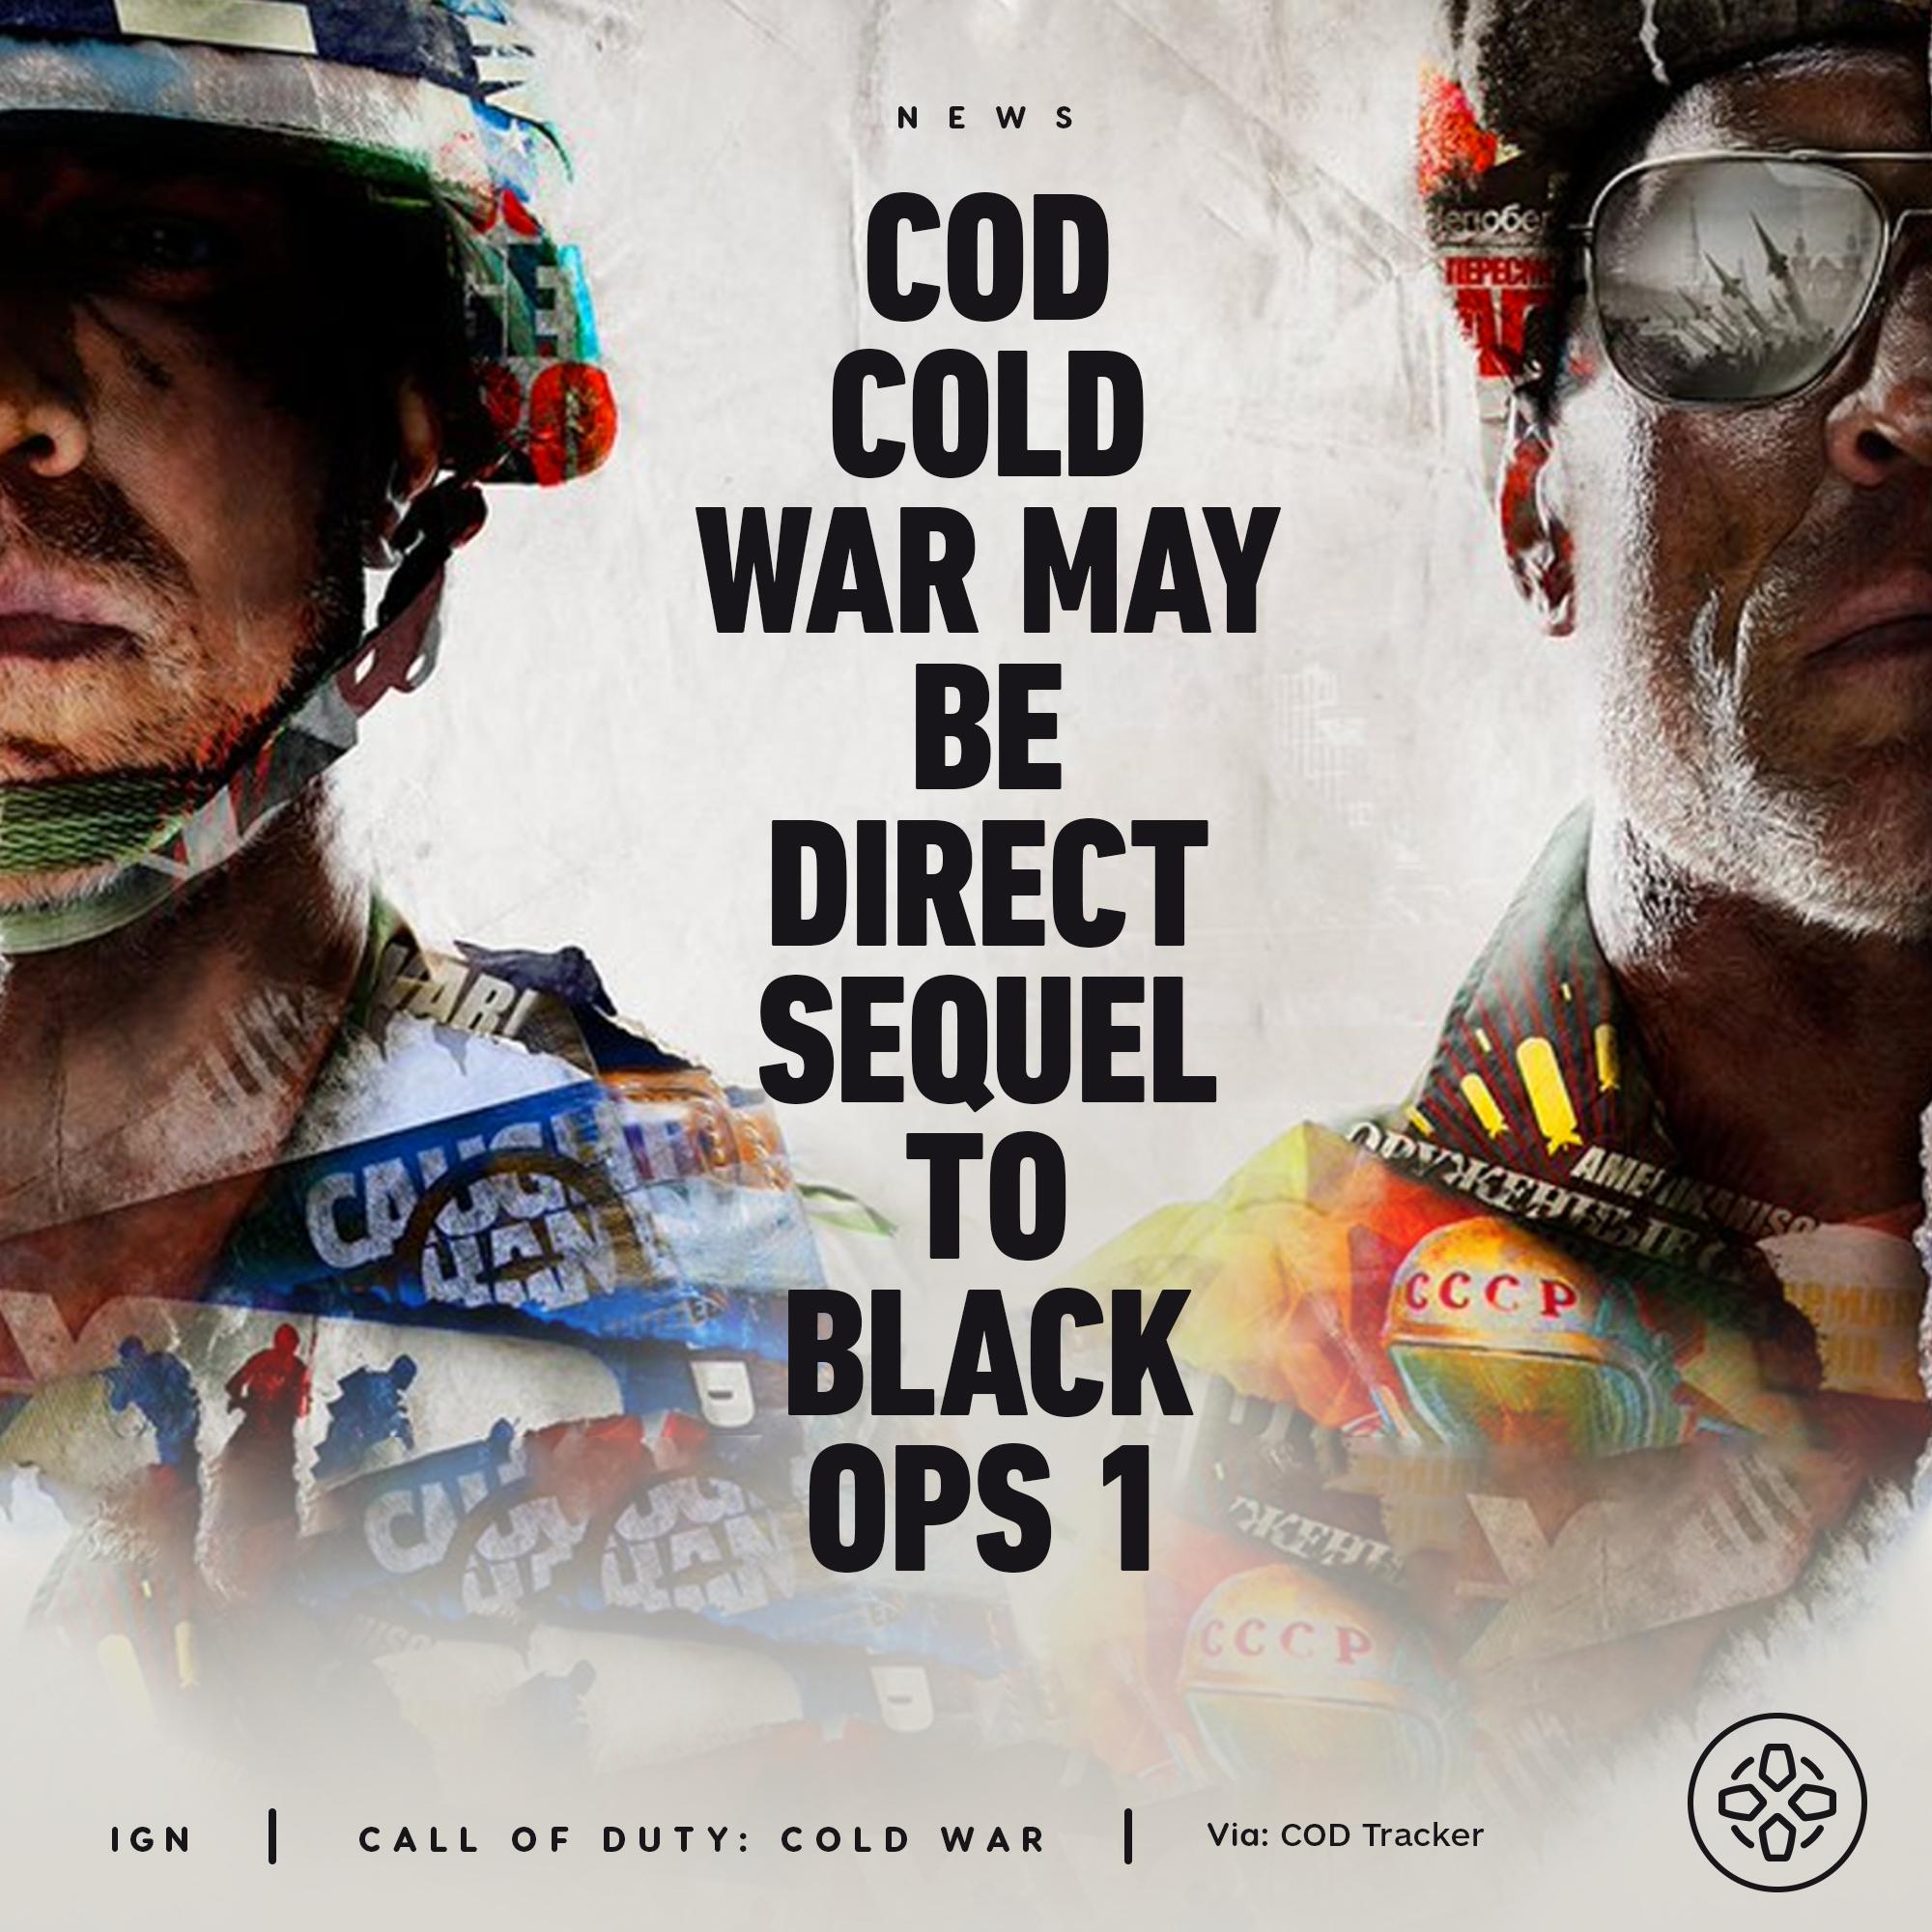 call of duty black ops cold war wallpaper phone